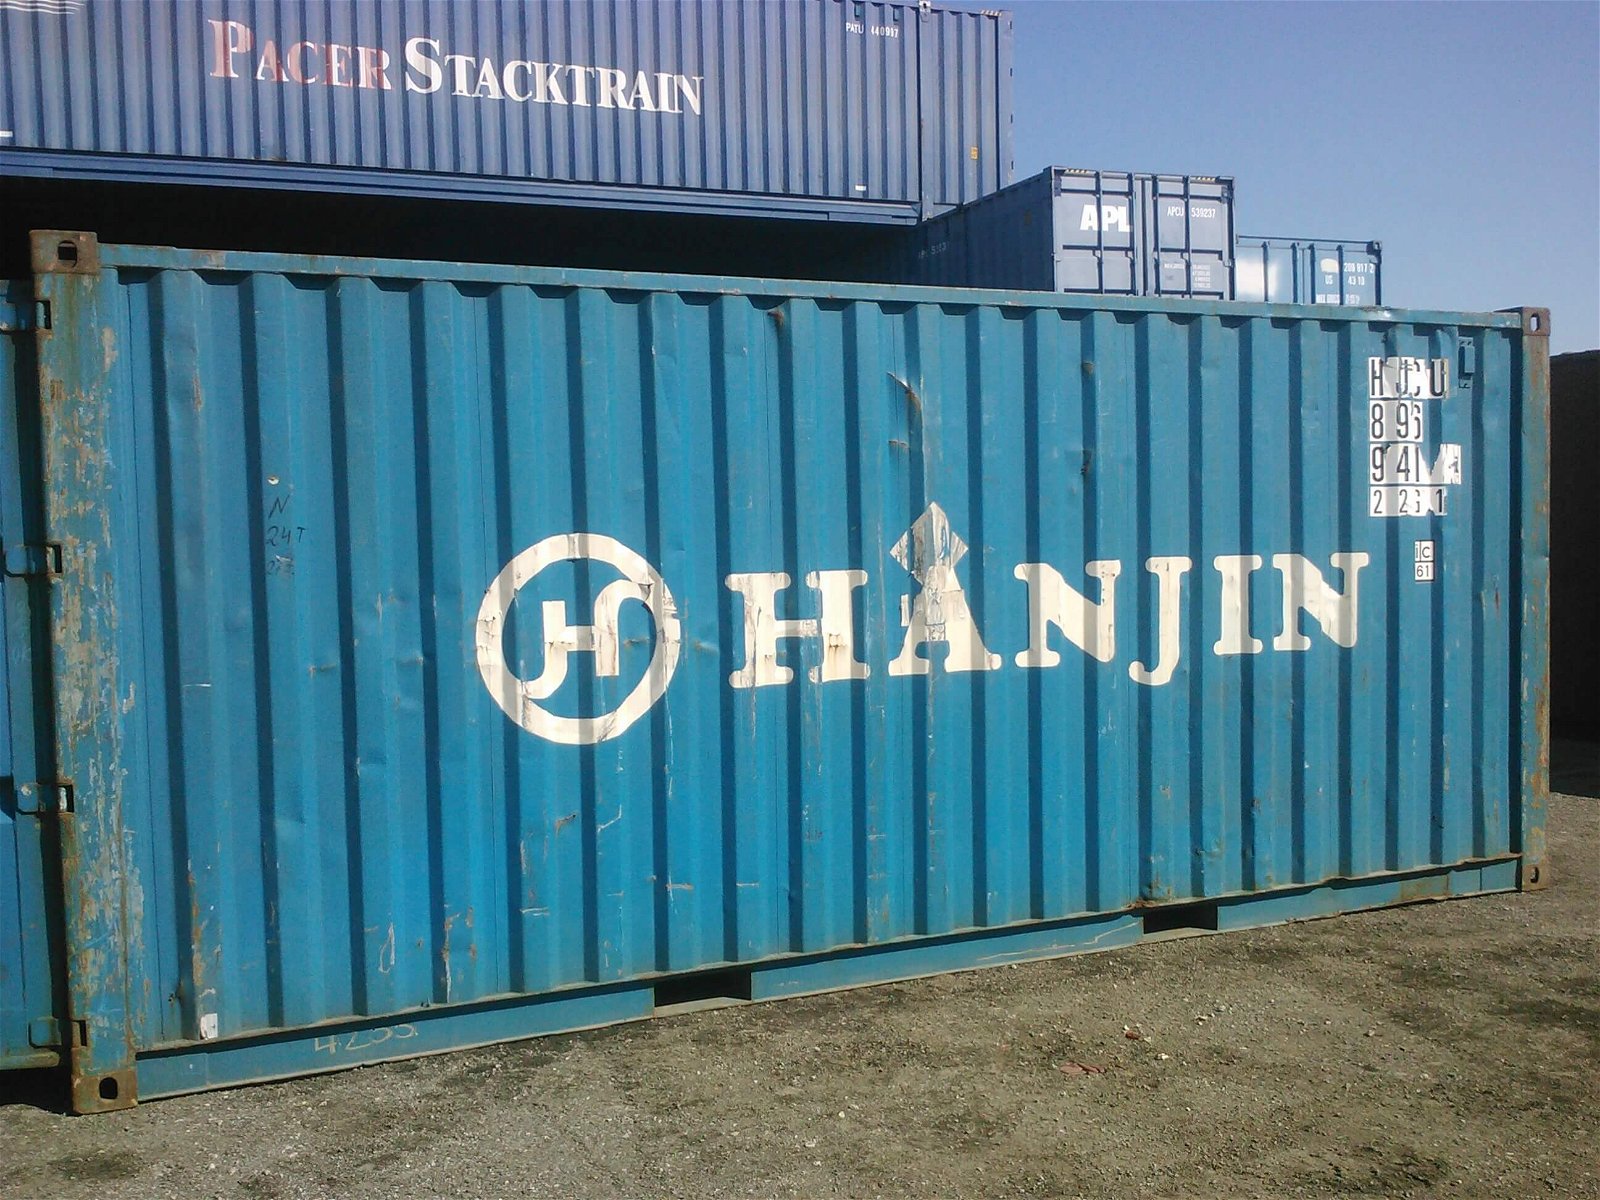 20ft Insulated Used Shipping Containers I Save Up To 30% - CMG